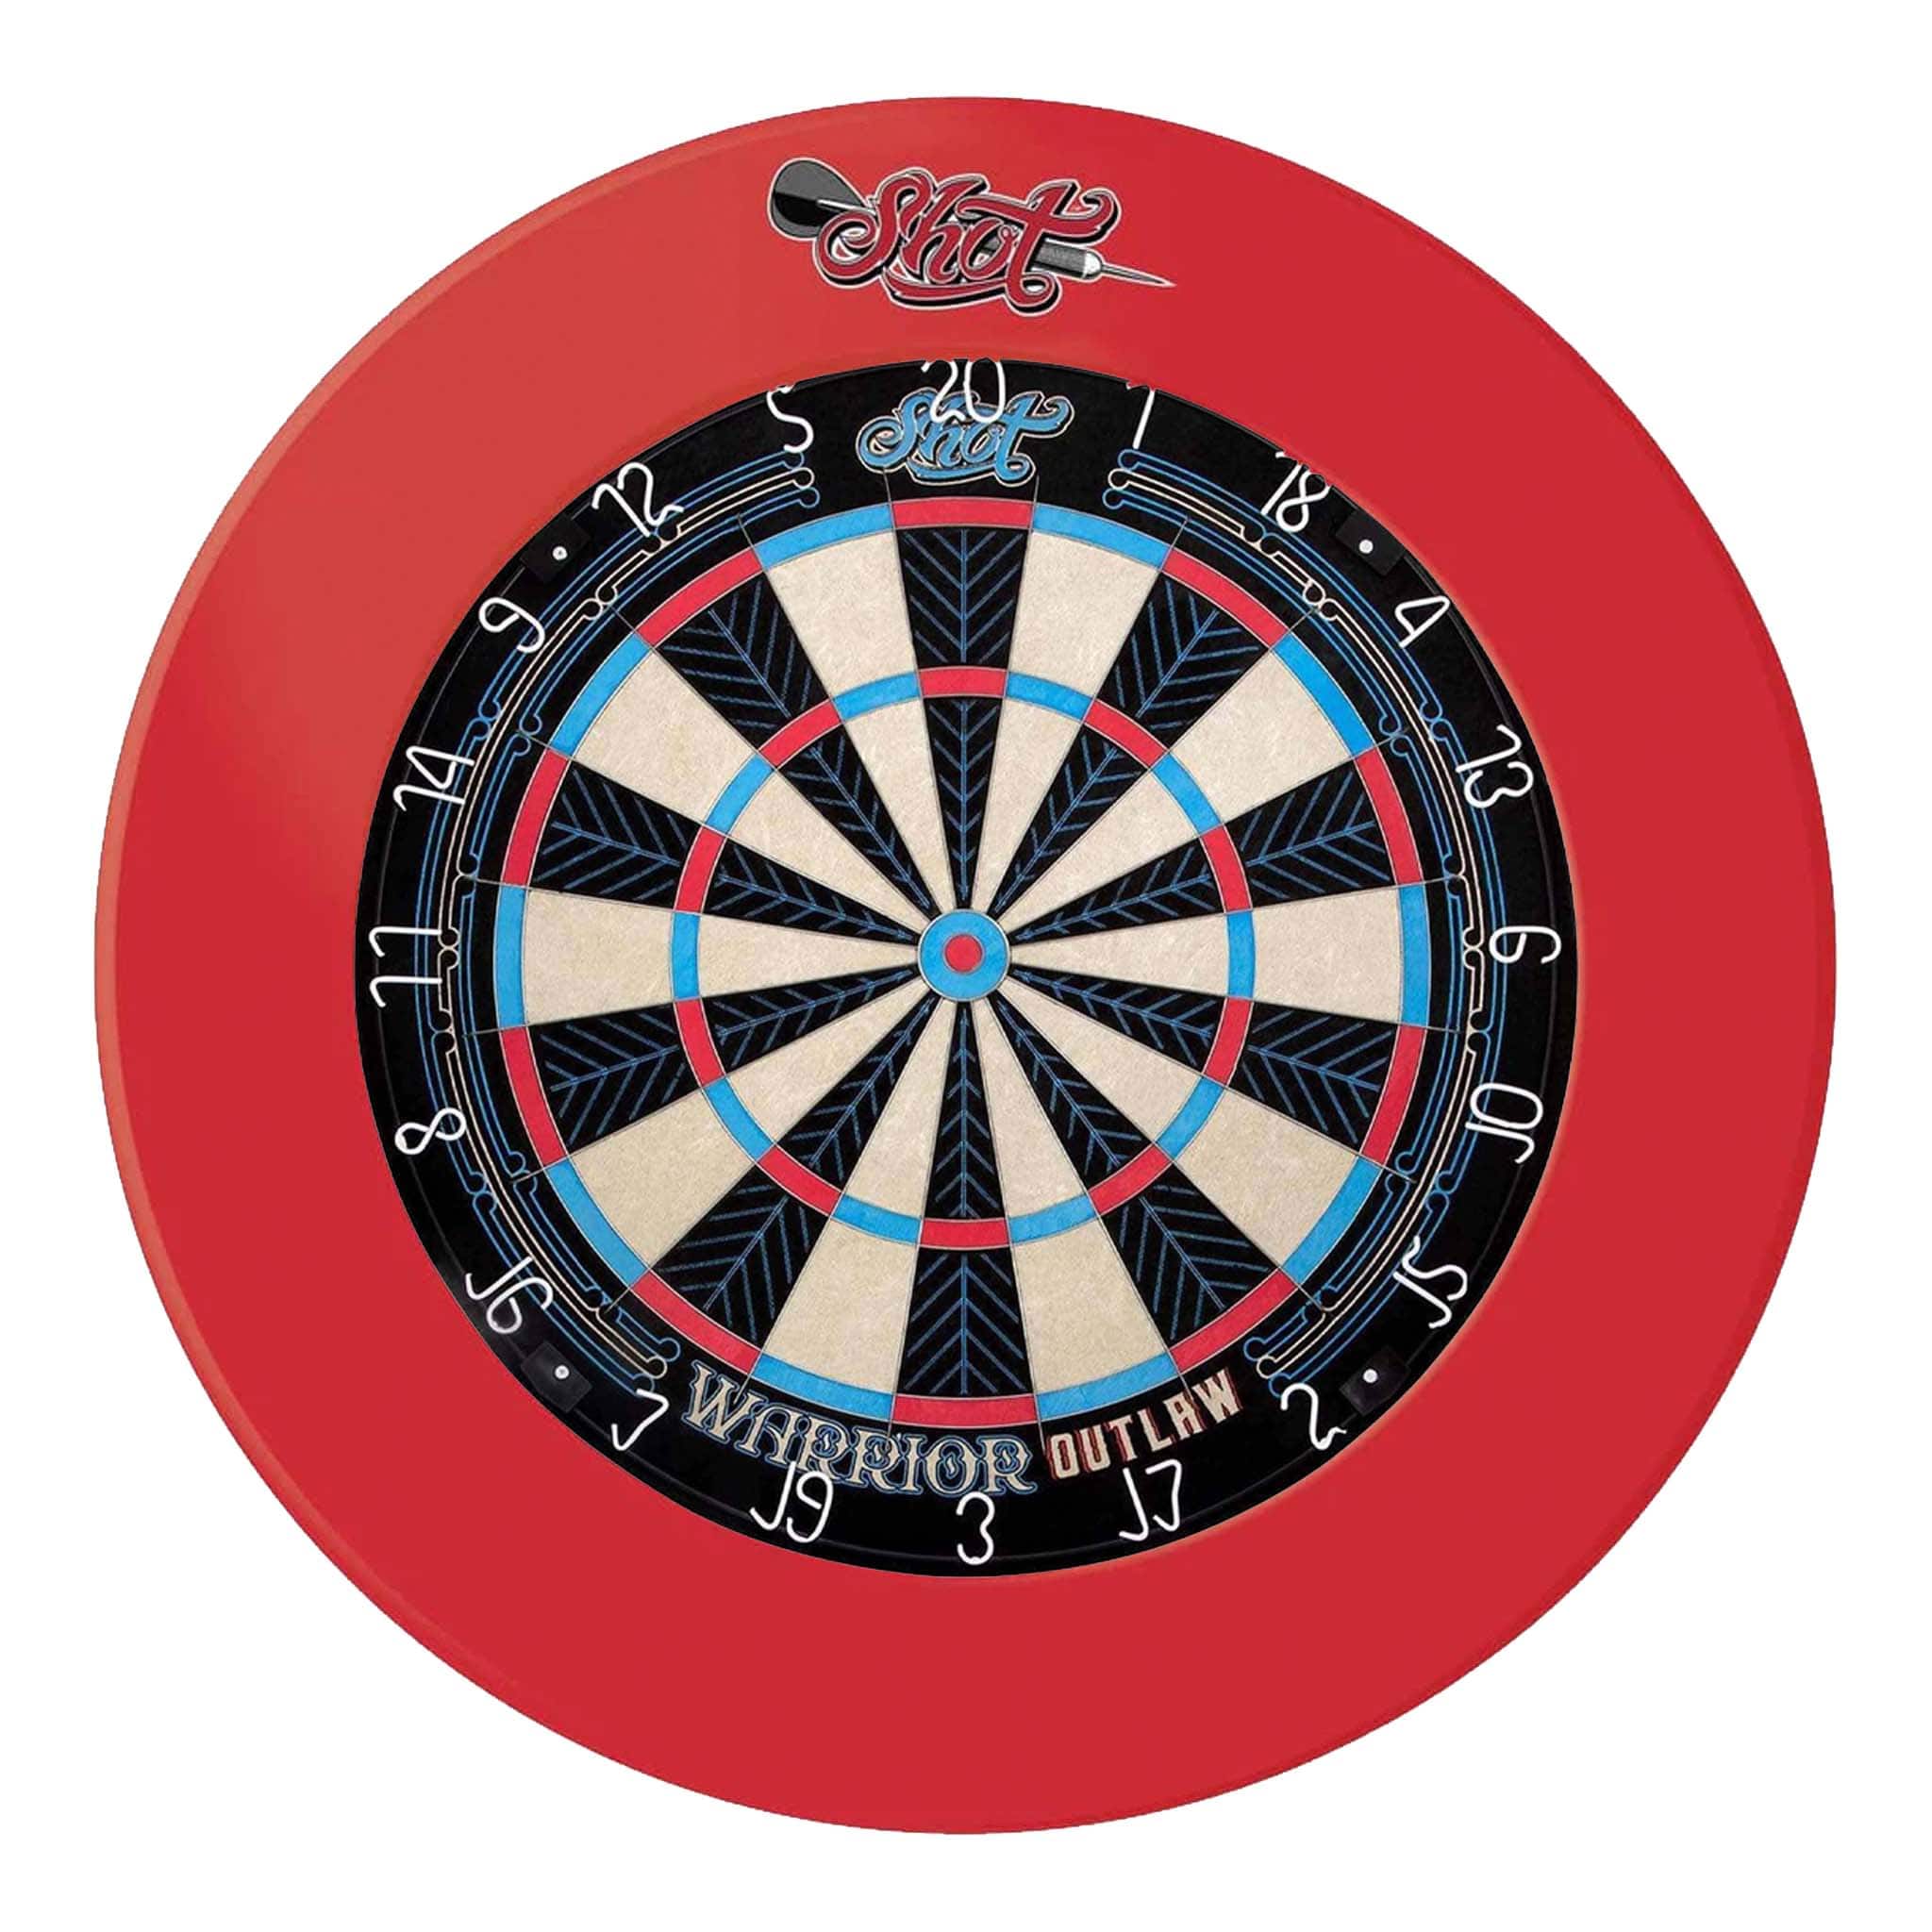 Shot Outlaw Dartboard & One Piece Surround Bundle Warrior Outlaw / Red Boards